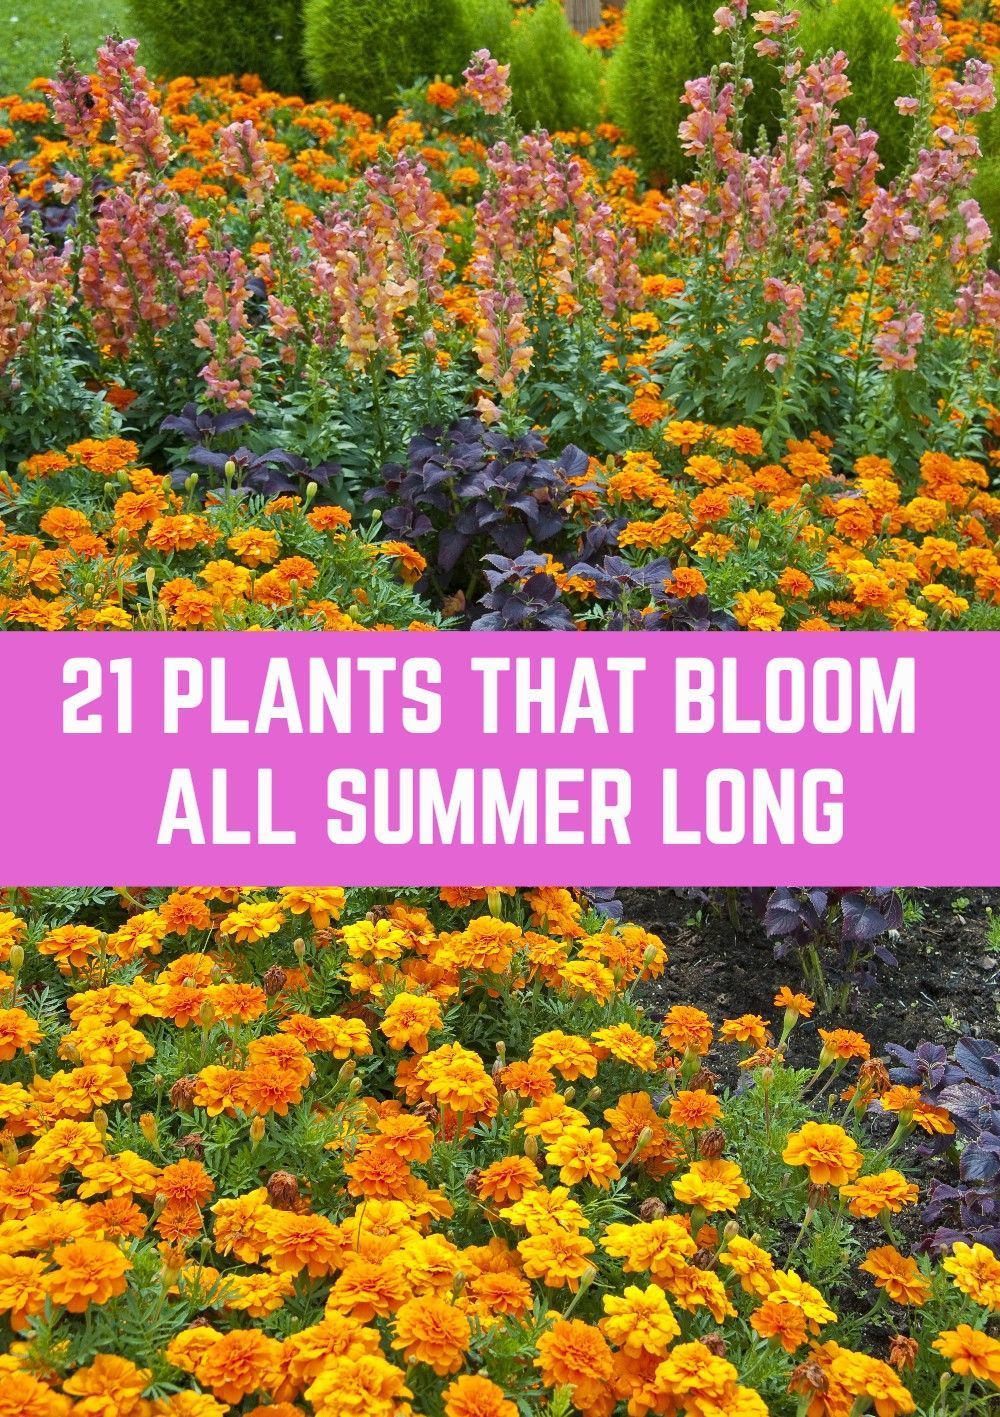 21 Plants That Bloom All Summer Long - 21 Plants That Bloom All Summer Long -   19 beauty Flowers landscapes ideas